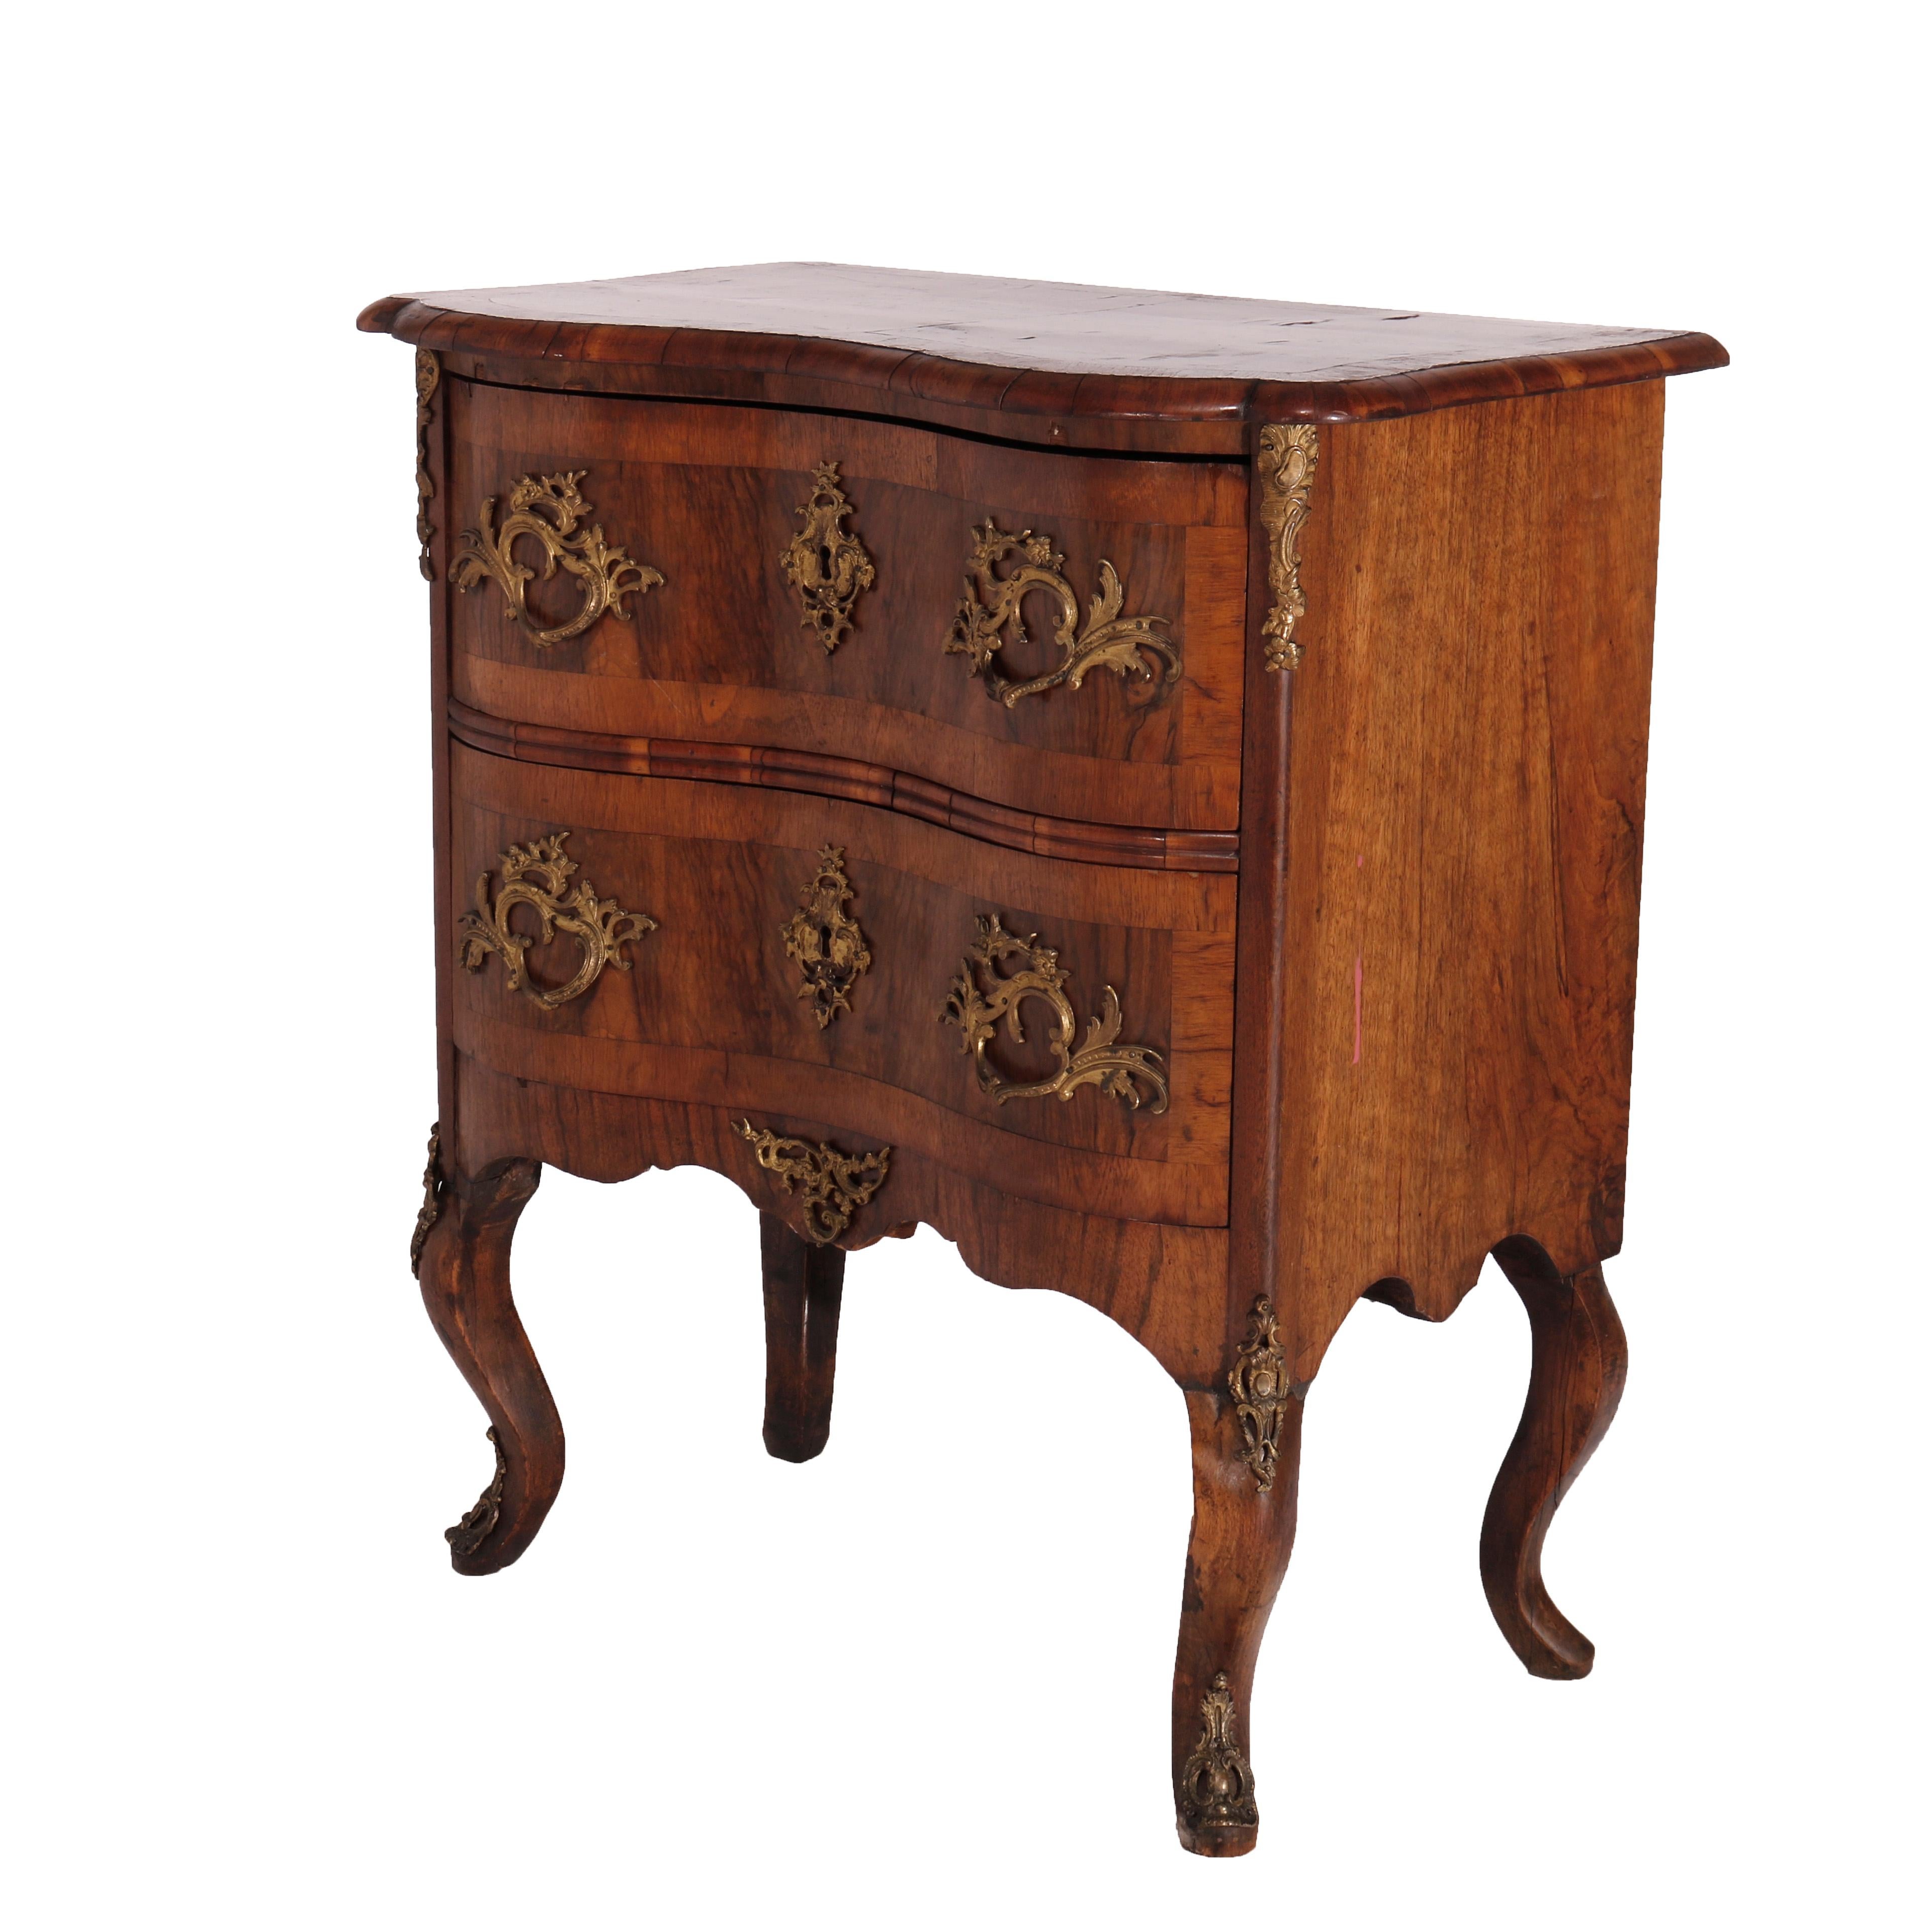  Antique Italian Kingwood, Satinwood & Burl Chest with Ormolu Mounts Late 18th C In Good Condition For Sale In Big Flats, NY